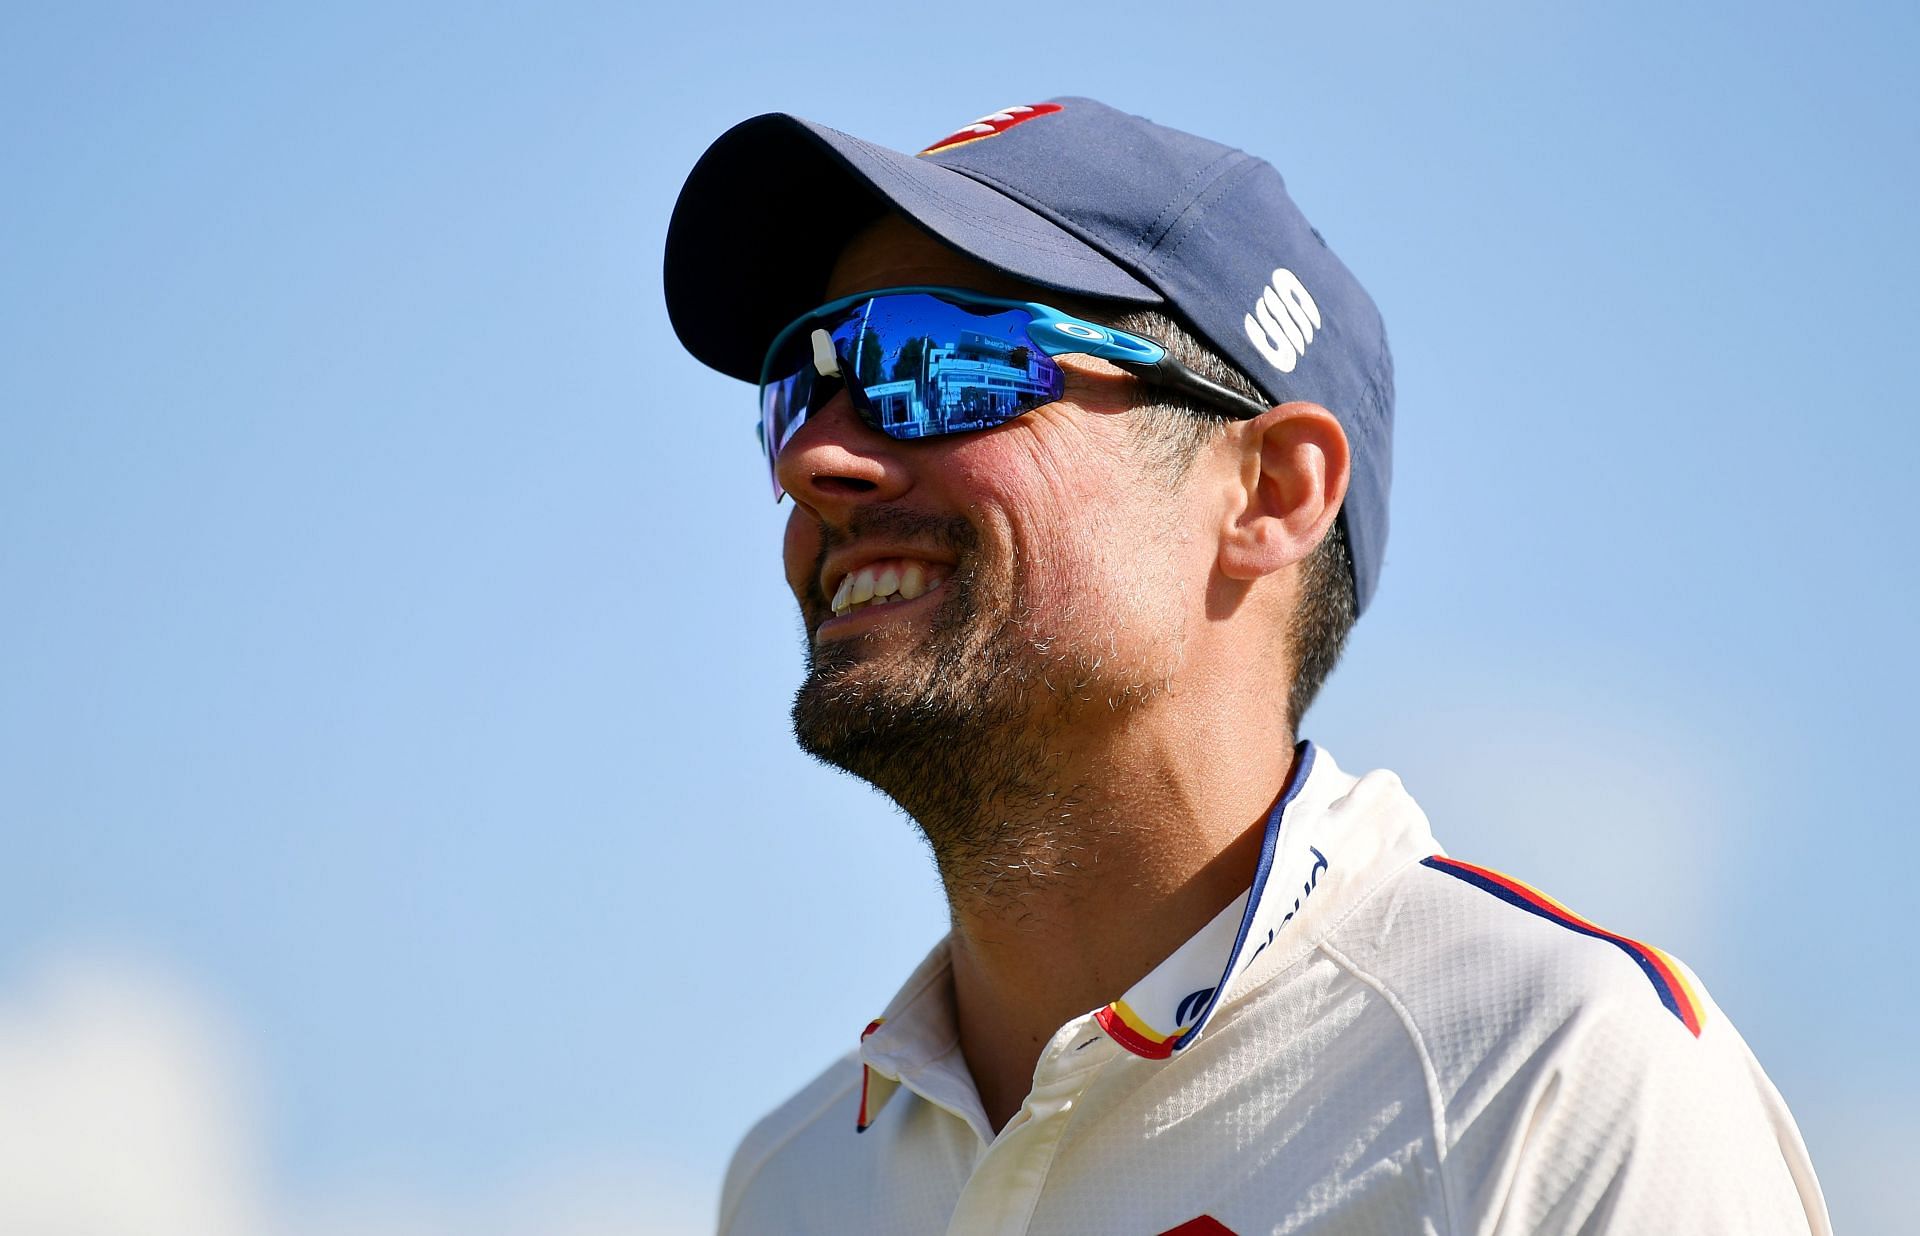 Sir Alastair Cook. (Image Credits: Getty)